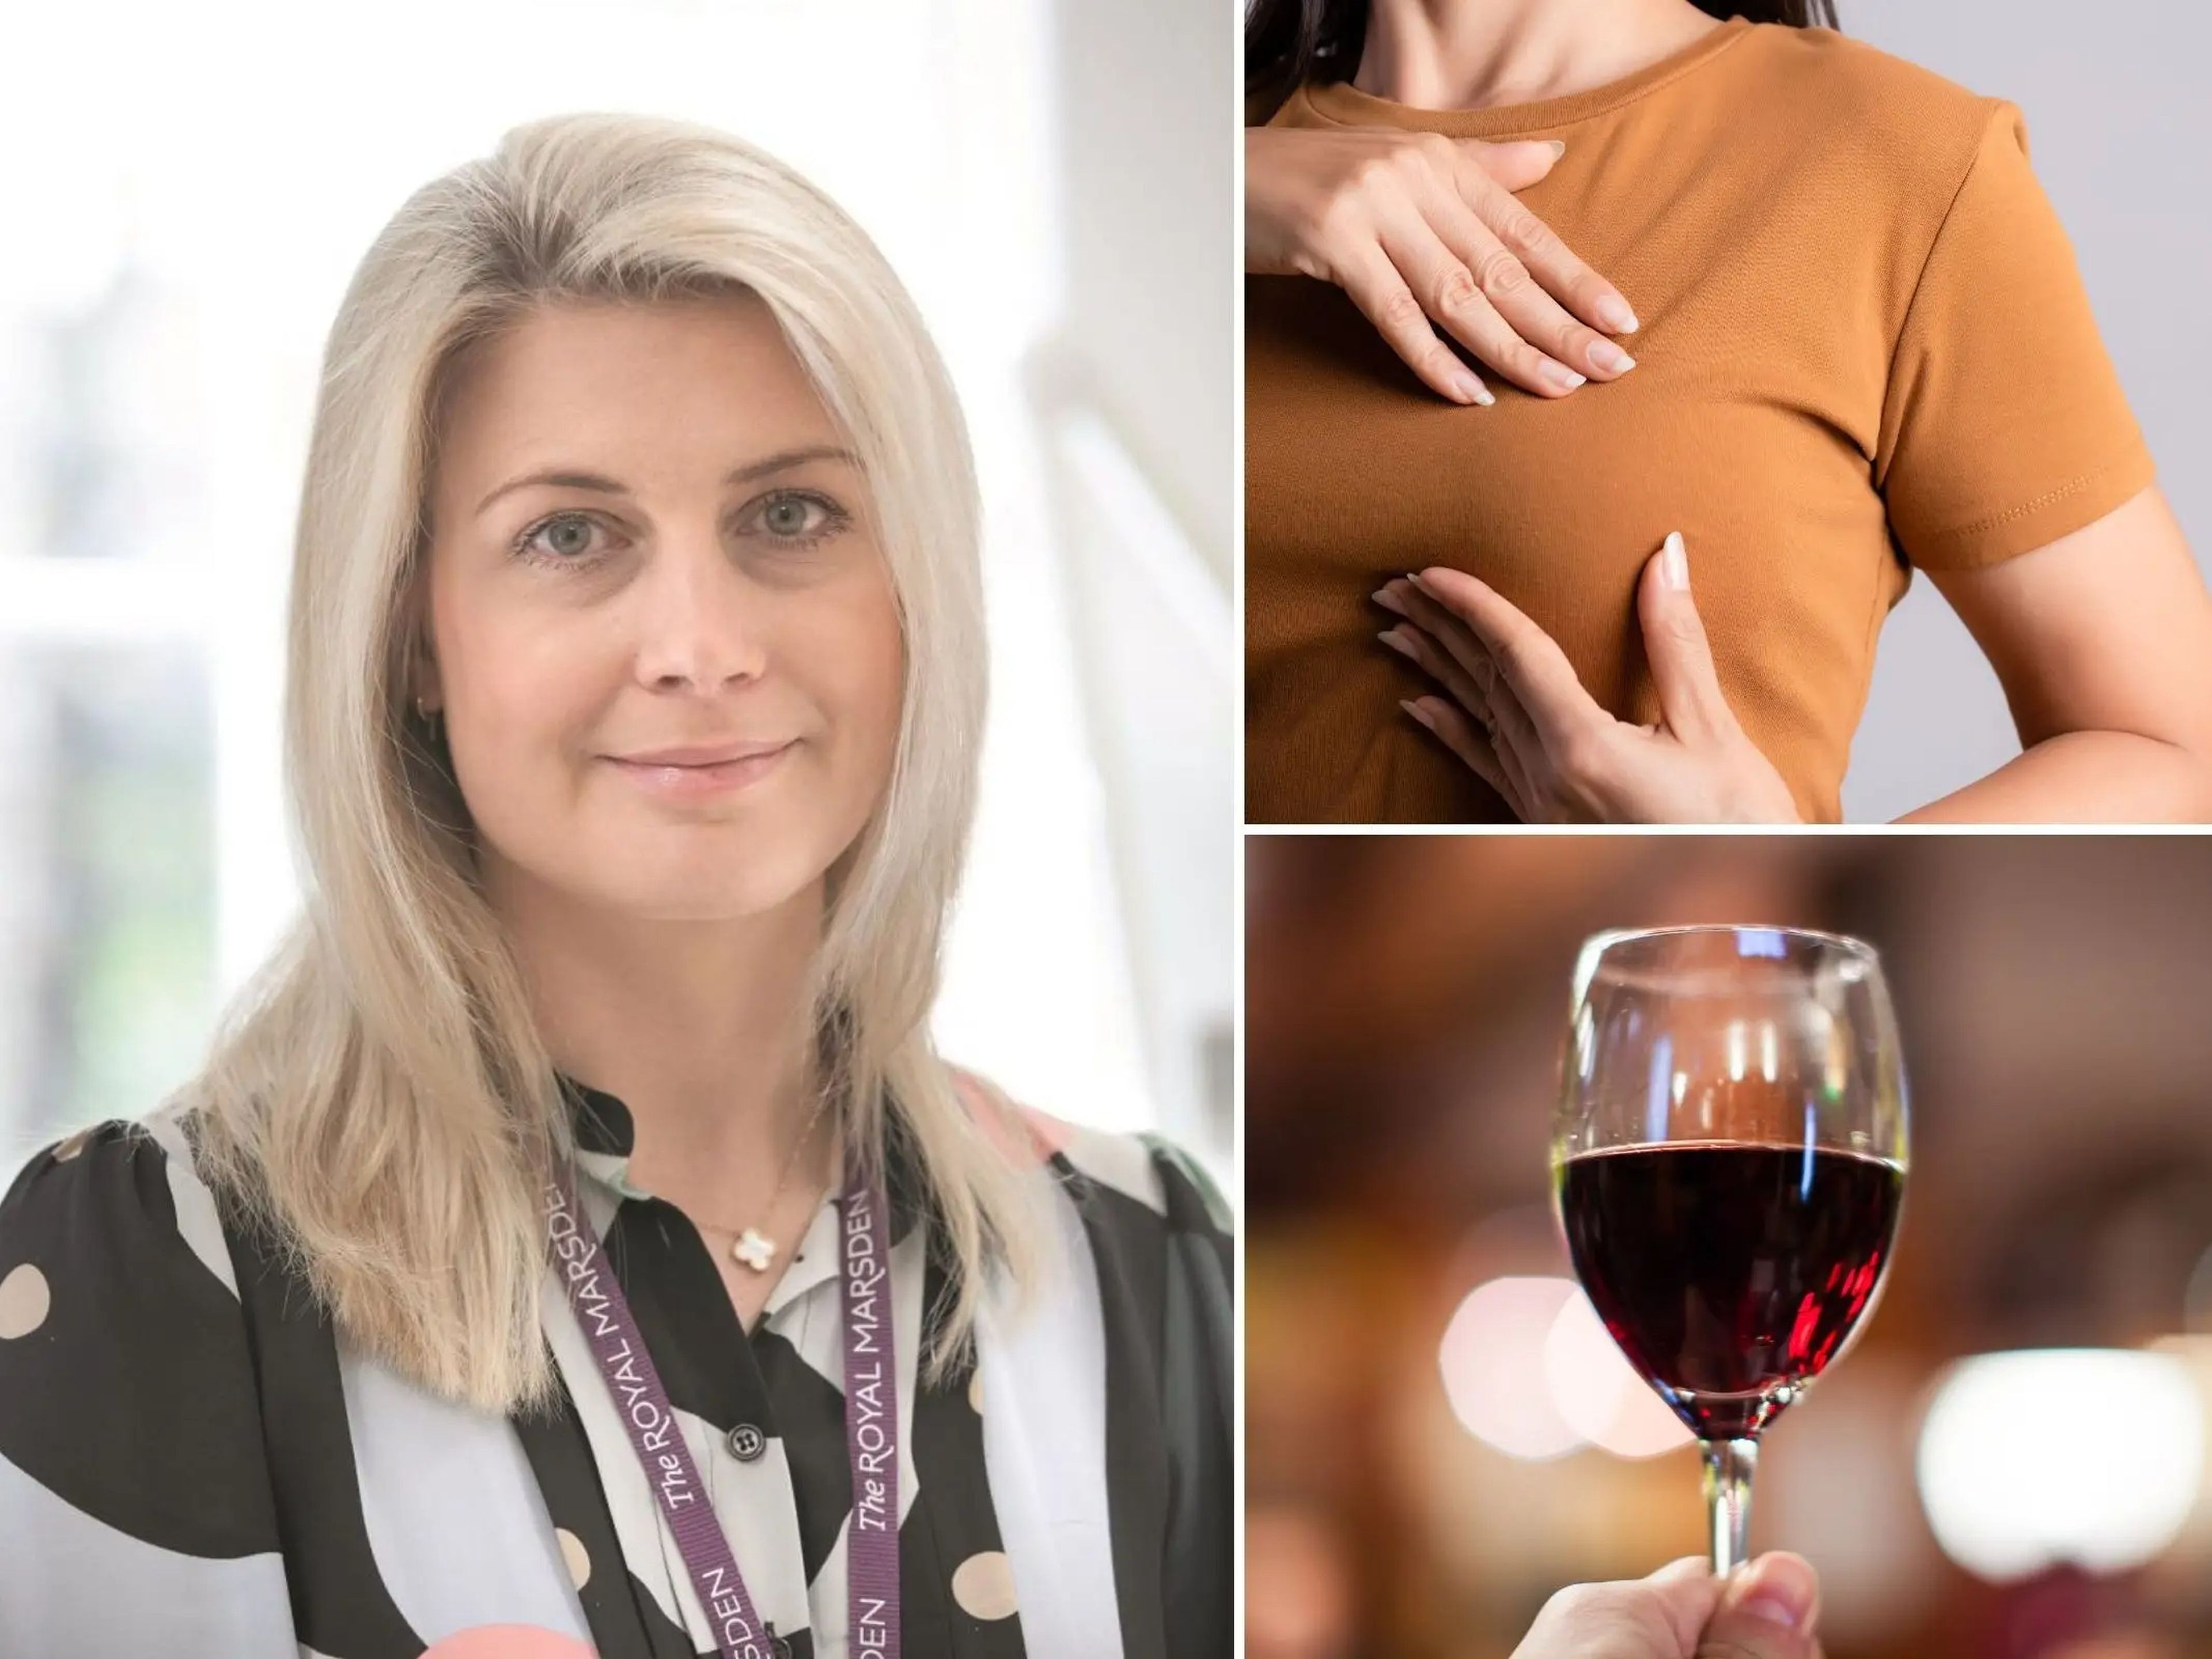 A breast cancer specialist split image with breast self check and a glass of wine.